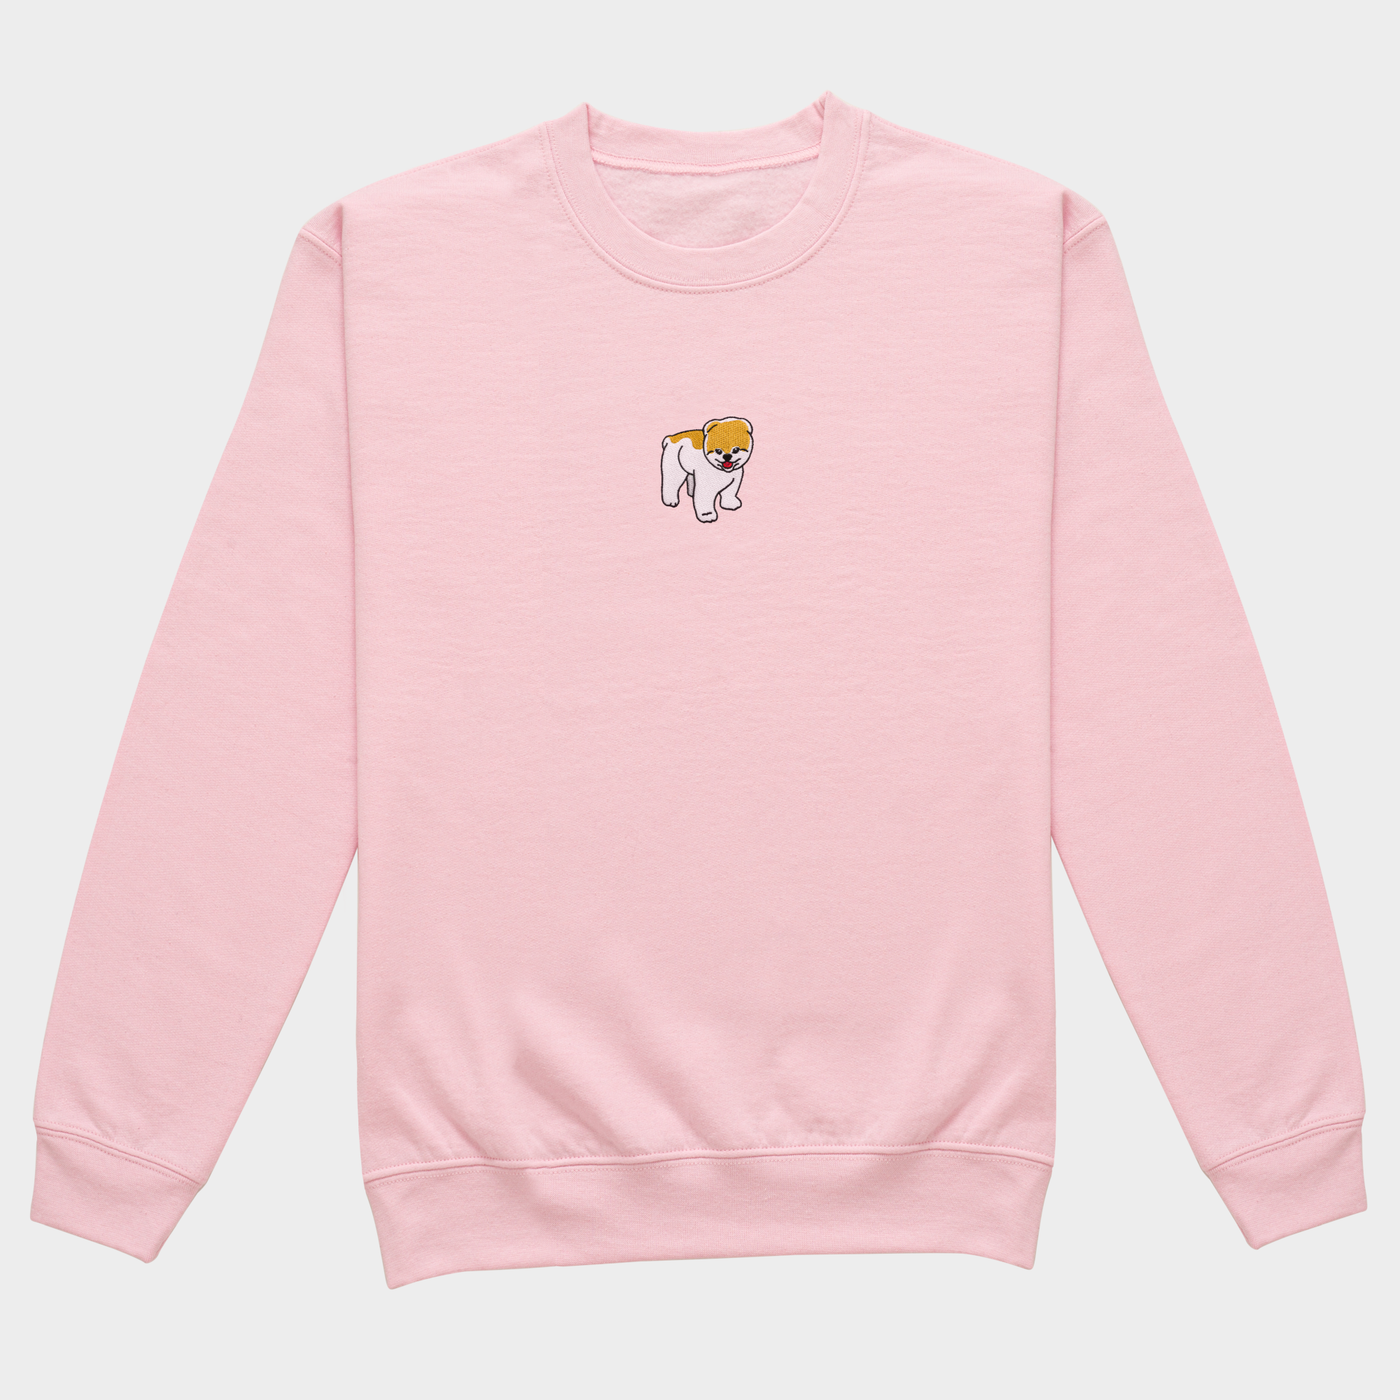 Bobby's Planet Women's Embroidered Pomeranian Sweatshirt from Paws Dog Cat Animals Collection in Light Pink Color#color_light-pink